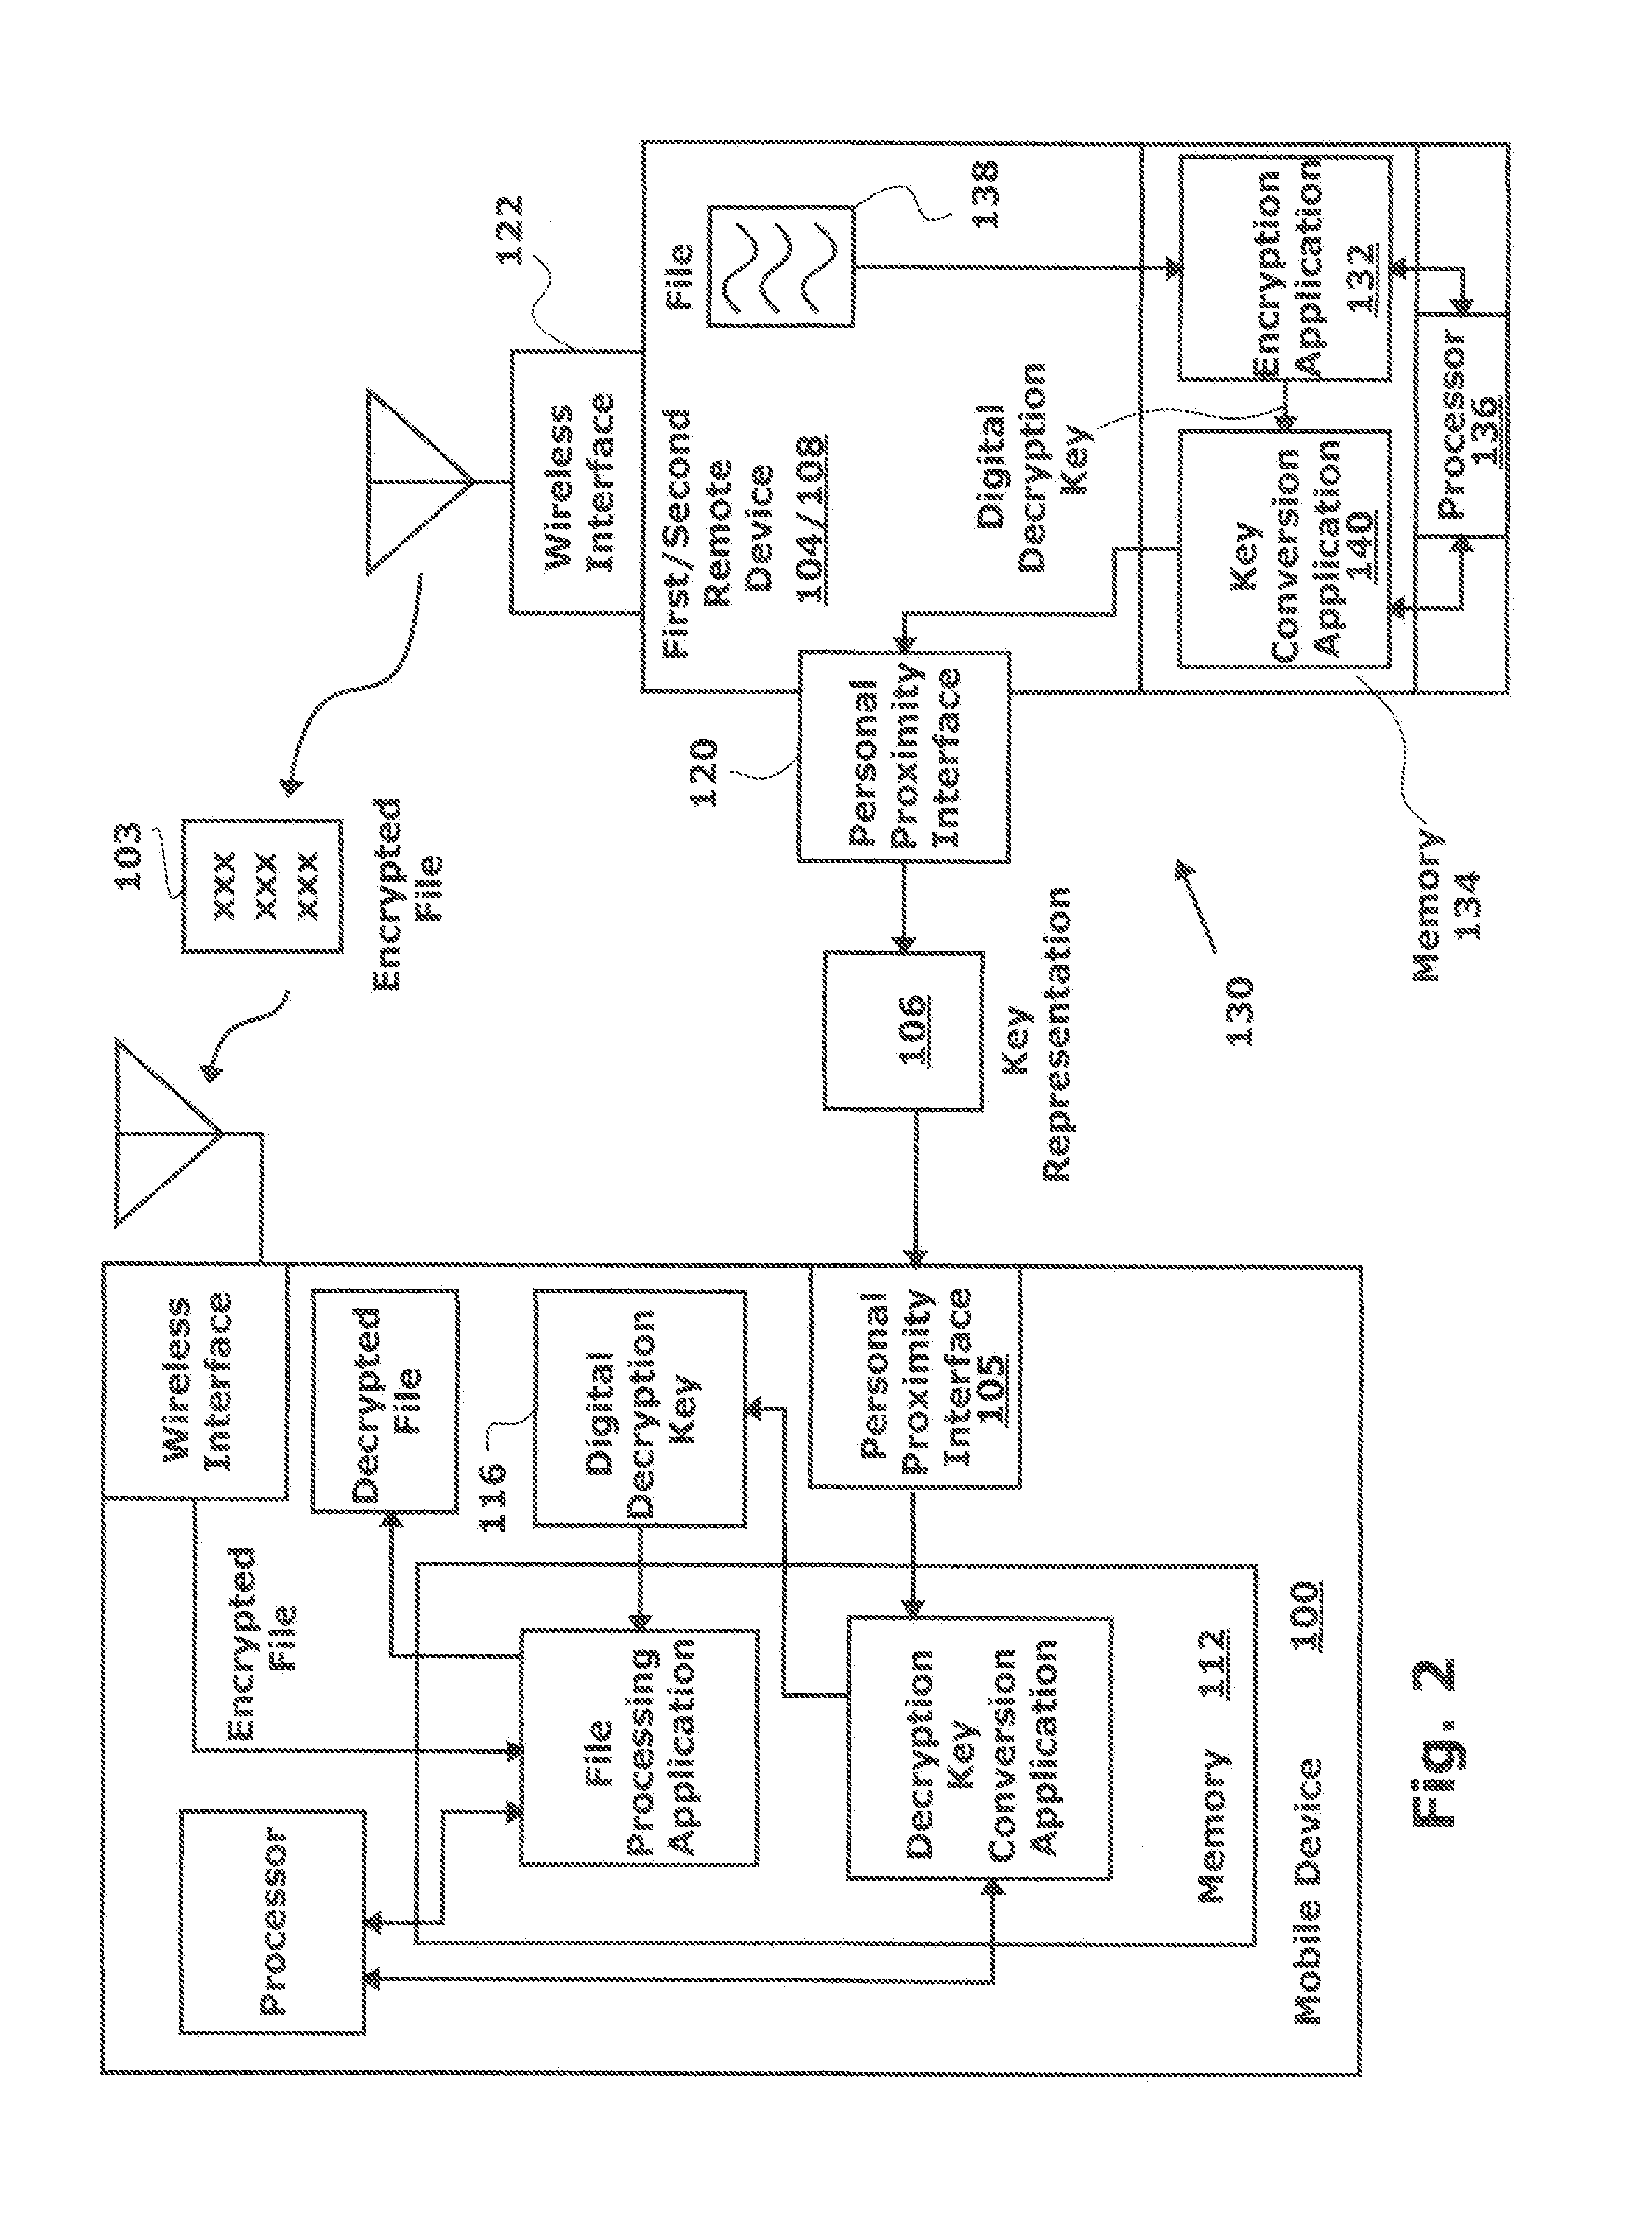 System and Method for Securely Decrypting Files Wirelessly Transmitted to a Mobile Device